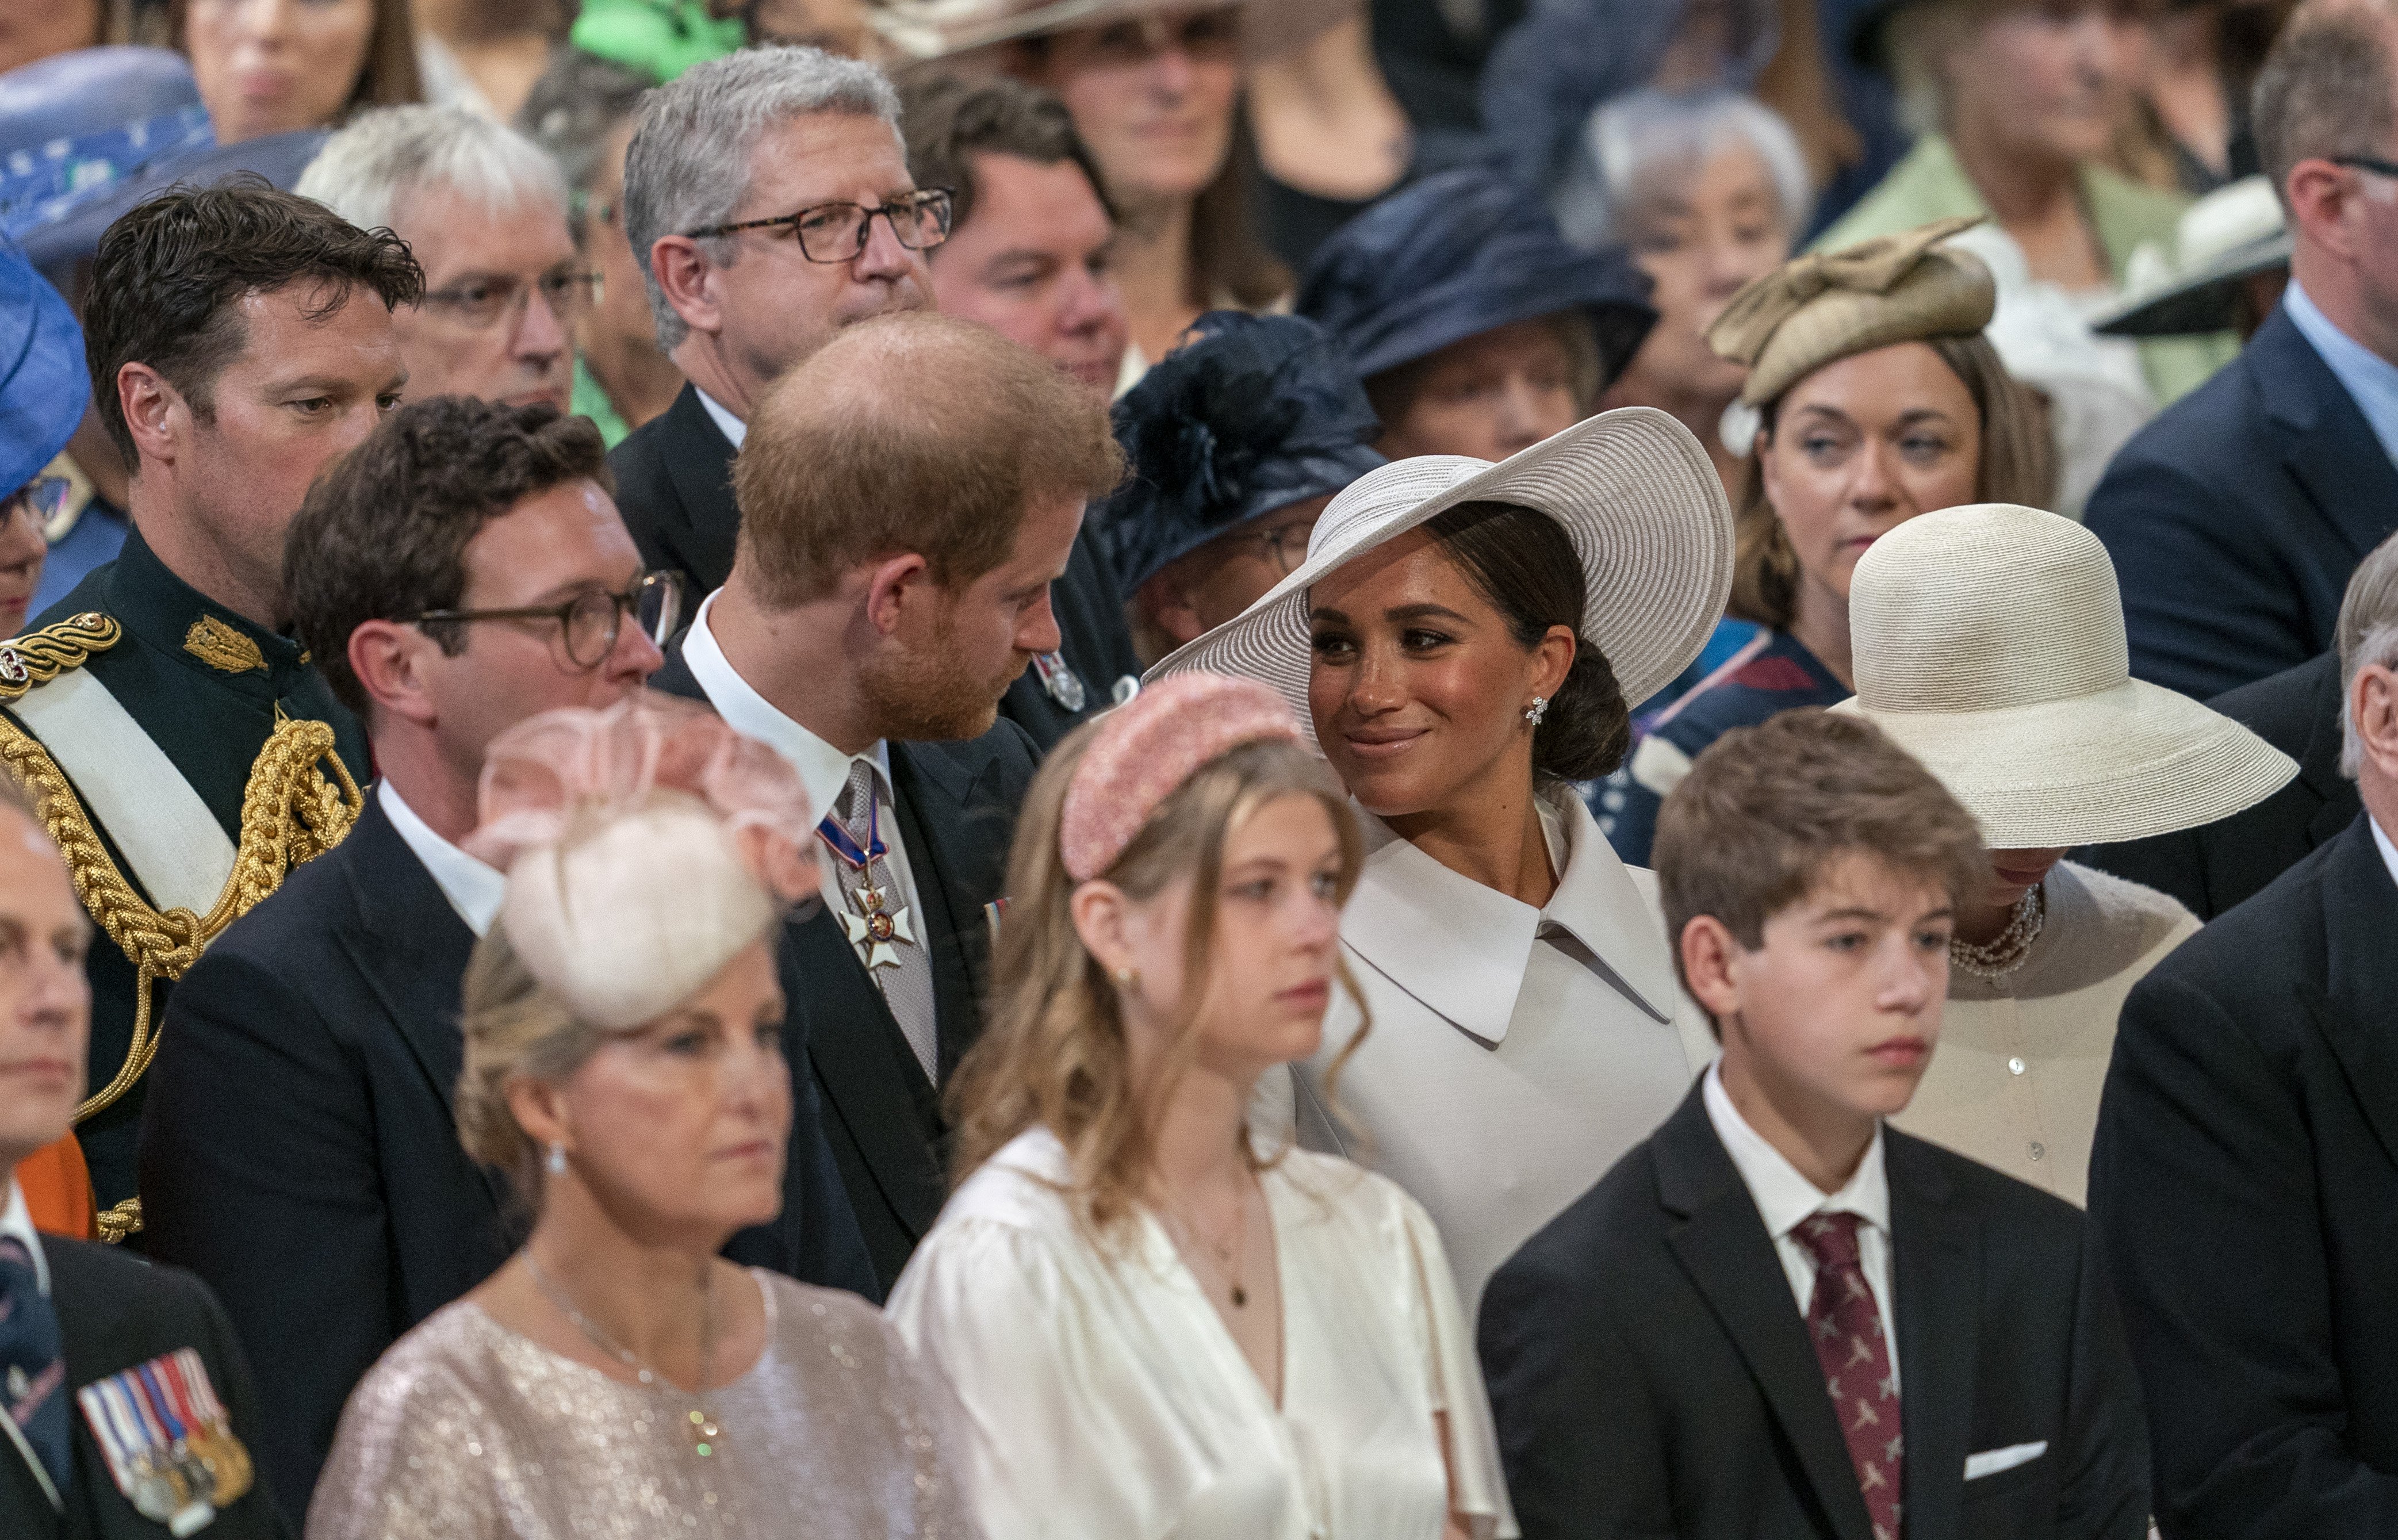 Prince Harry and Duchess Meghan at the Service of Thanksgiving for the Queen, on June 3, 2022, in London, England. | Source: Getty Images